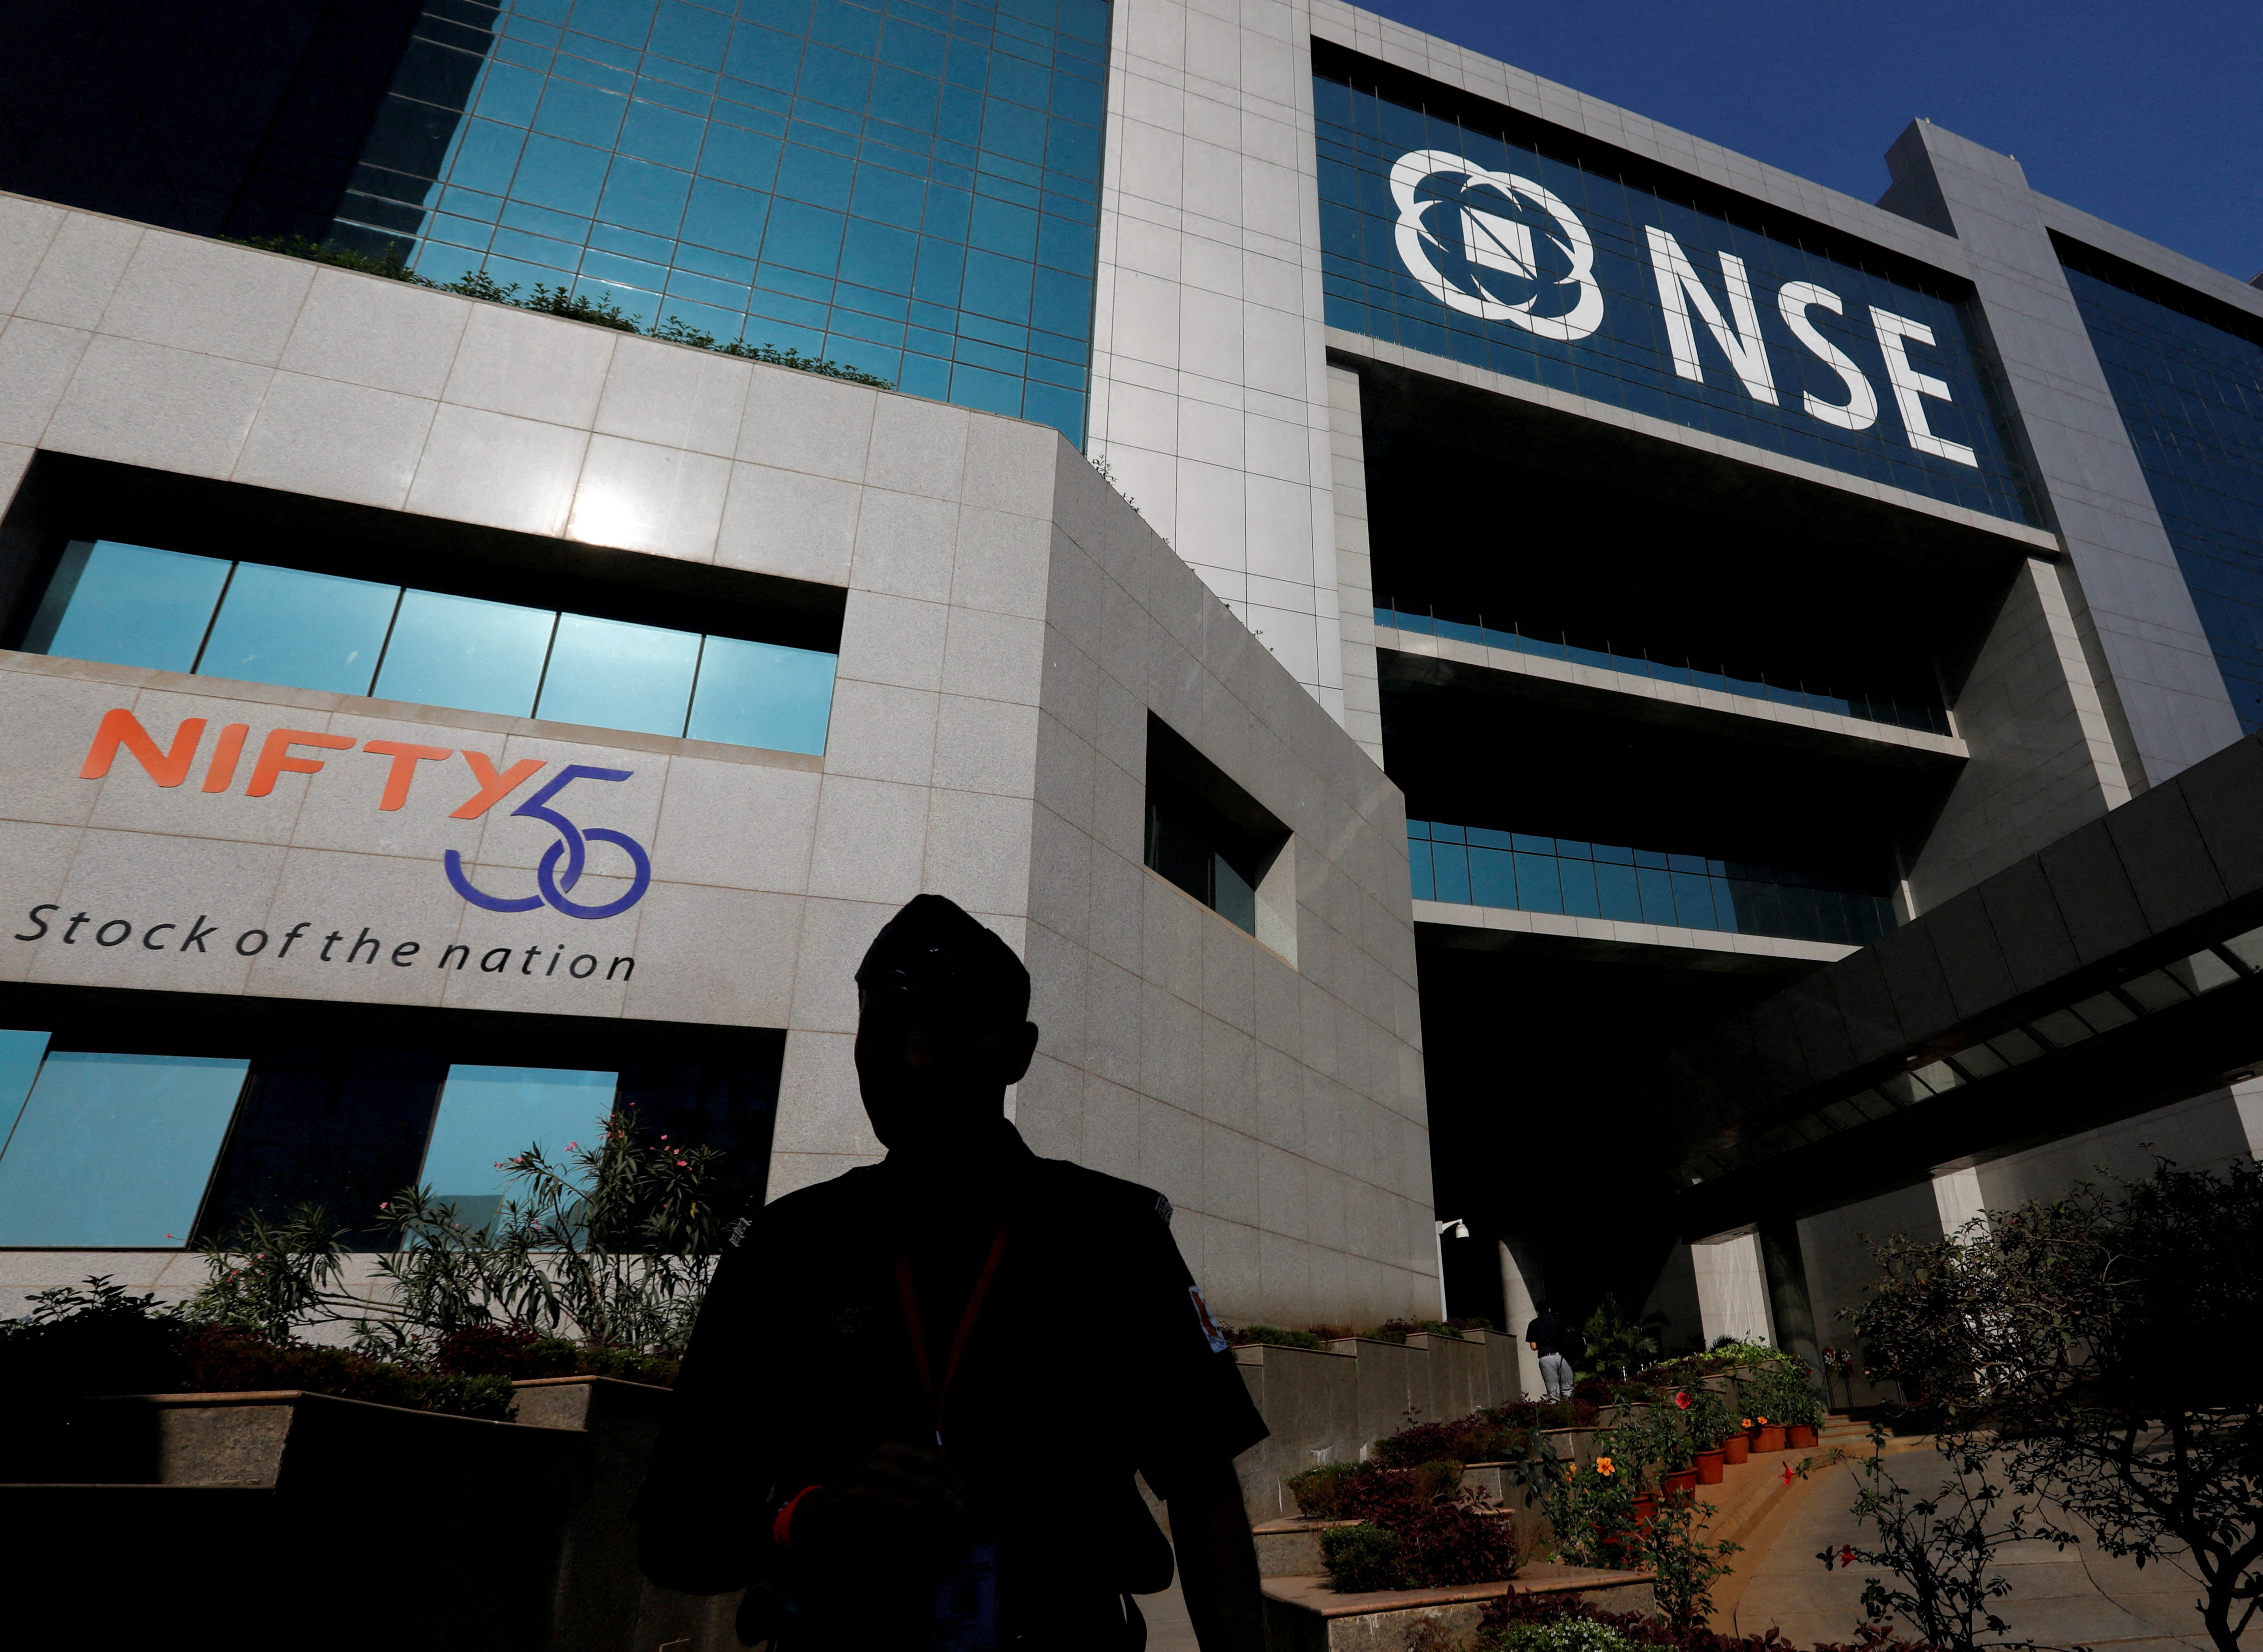 A guard walks past the NSE (National Stock Exchange) building in Mumbai